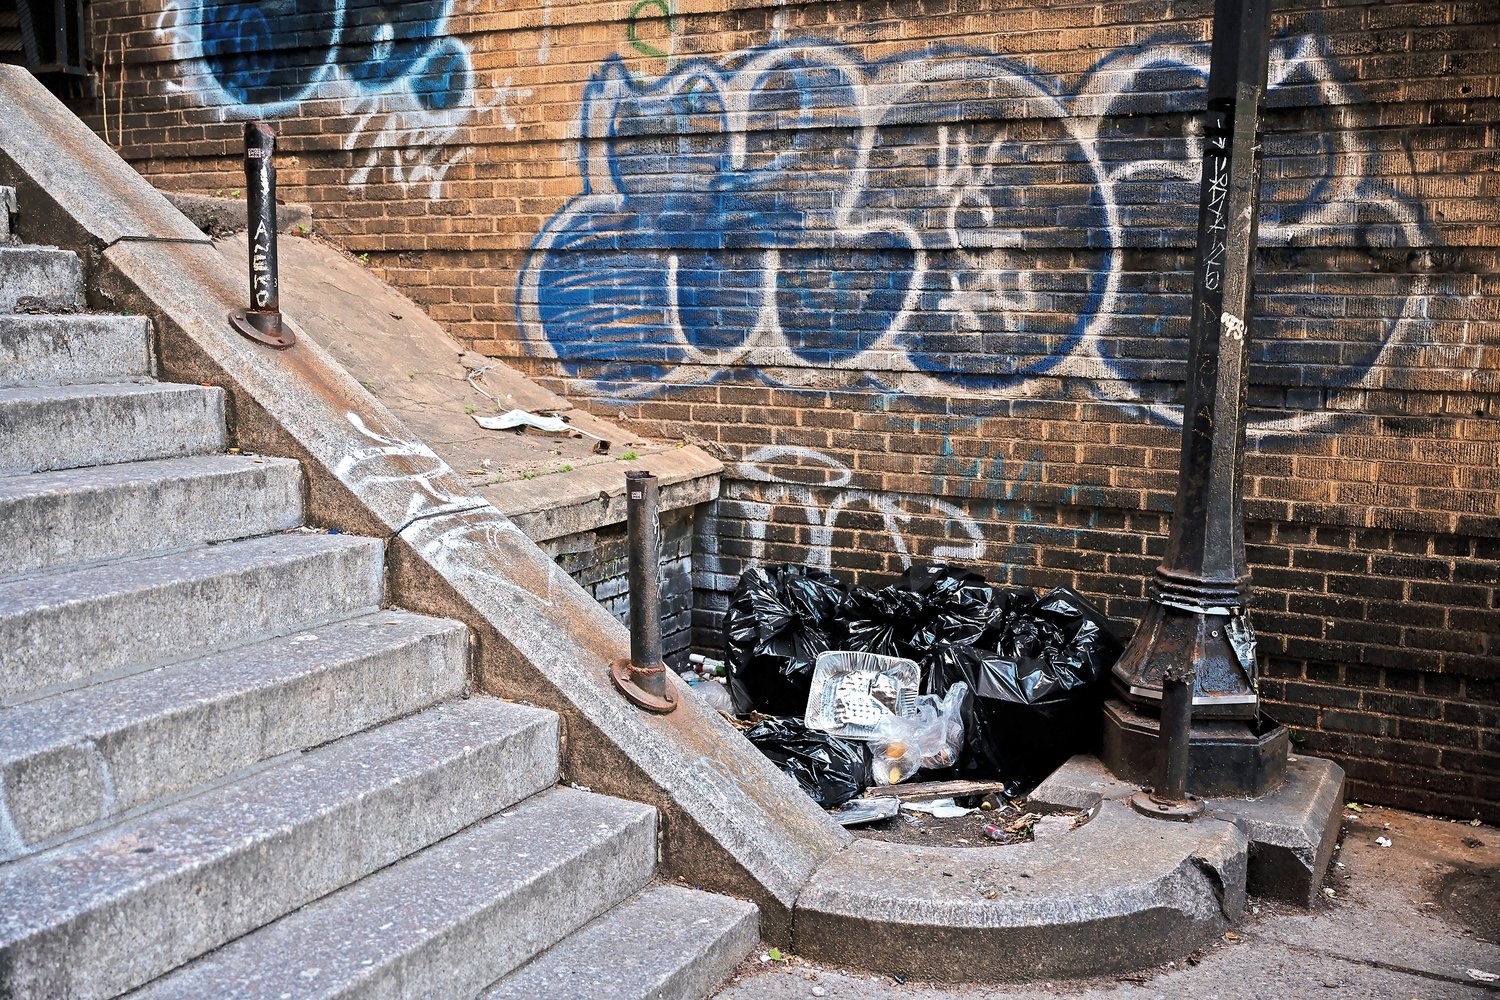 Piles of trash at the foot of the Godwin Terrace steps on Monday, May 9, 2022.